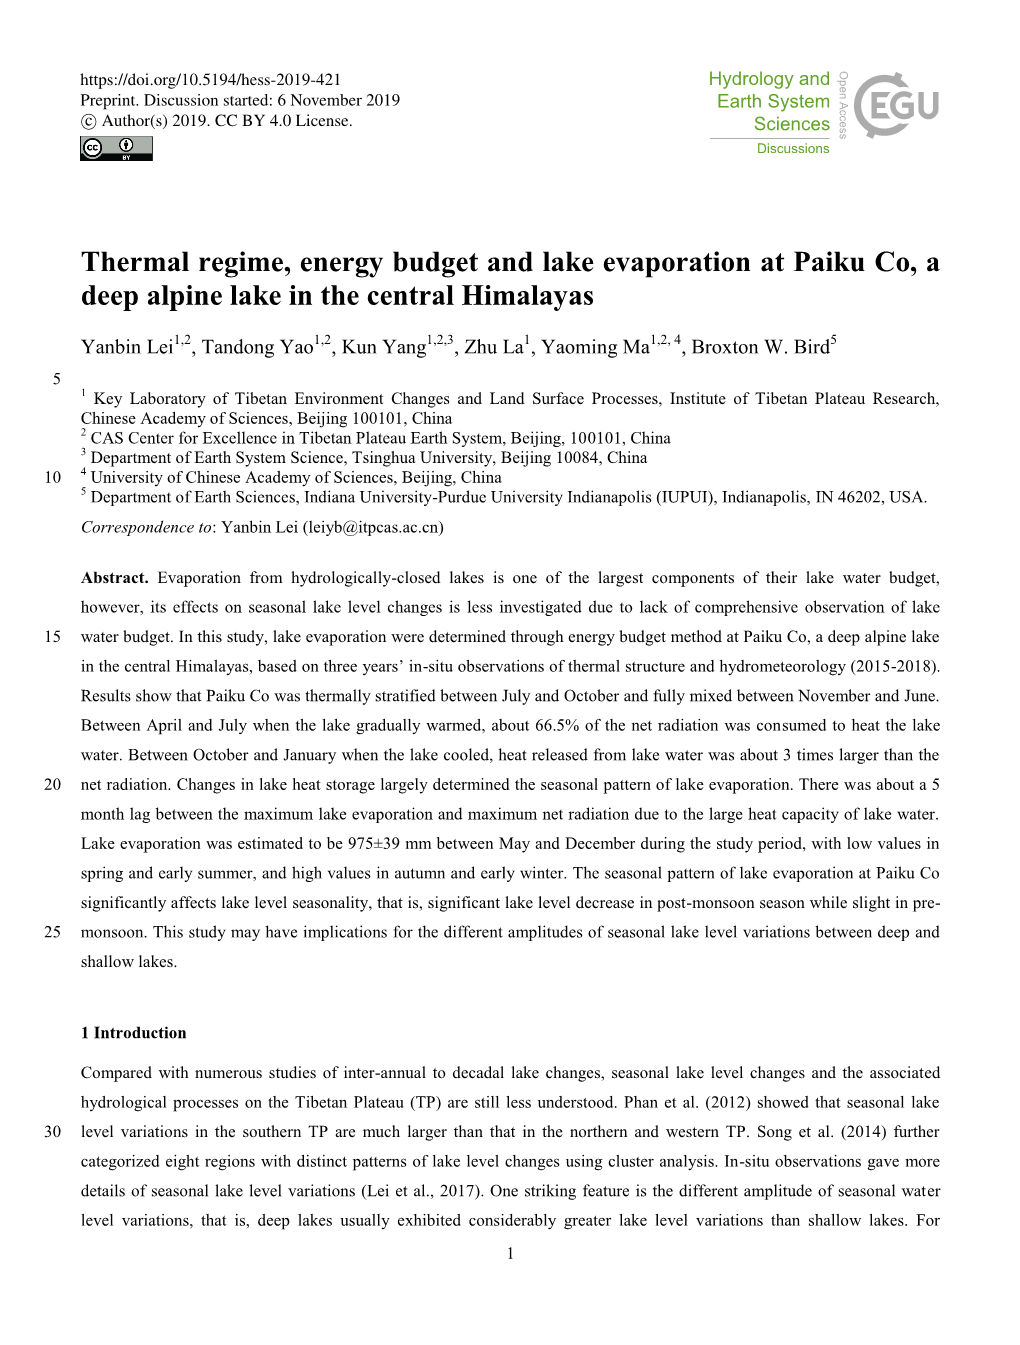 Thermal Regime, Energy Budget and Lake Evaporation at Paiku Co, a Deep Alpine Lake in the Central Himalayas